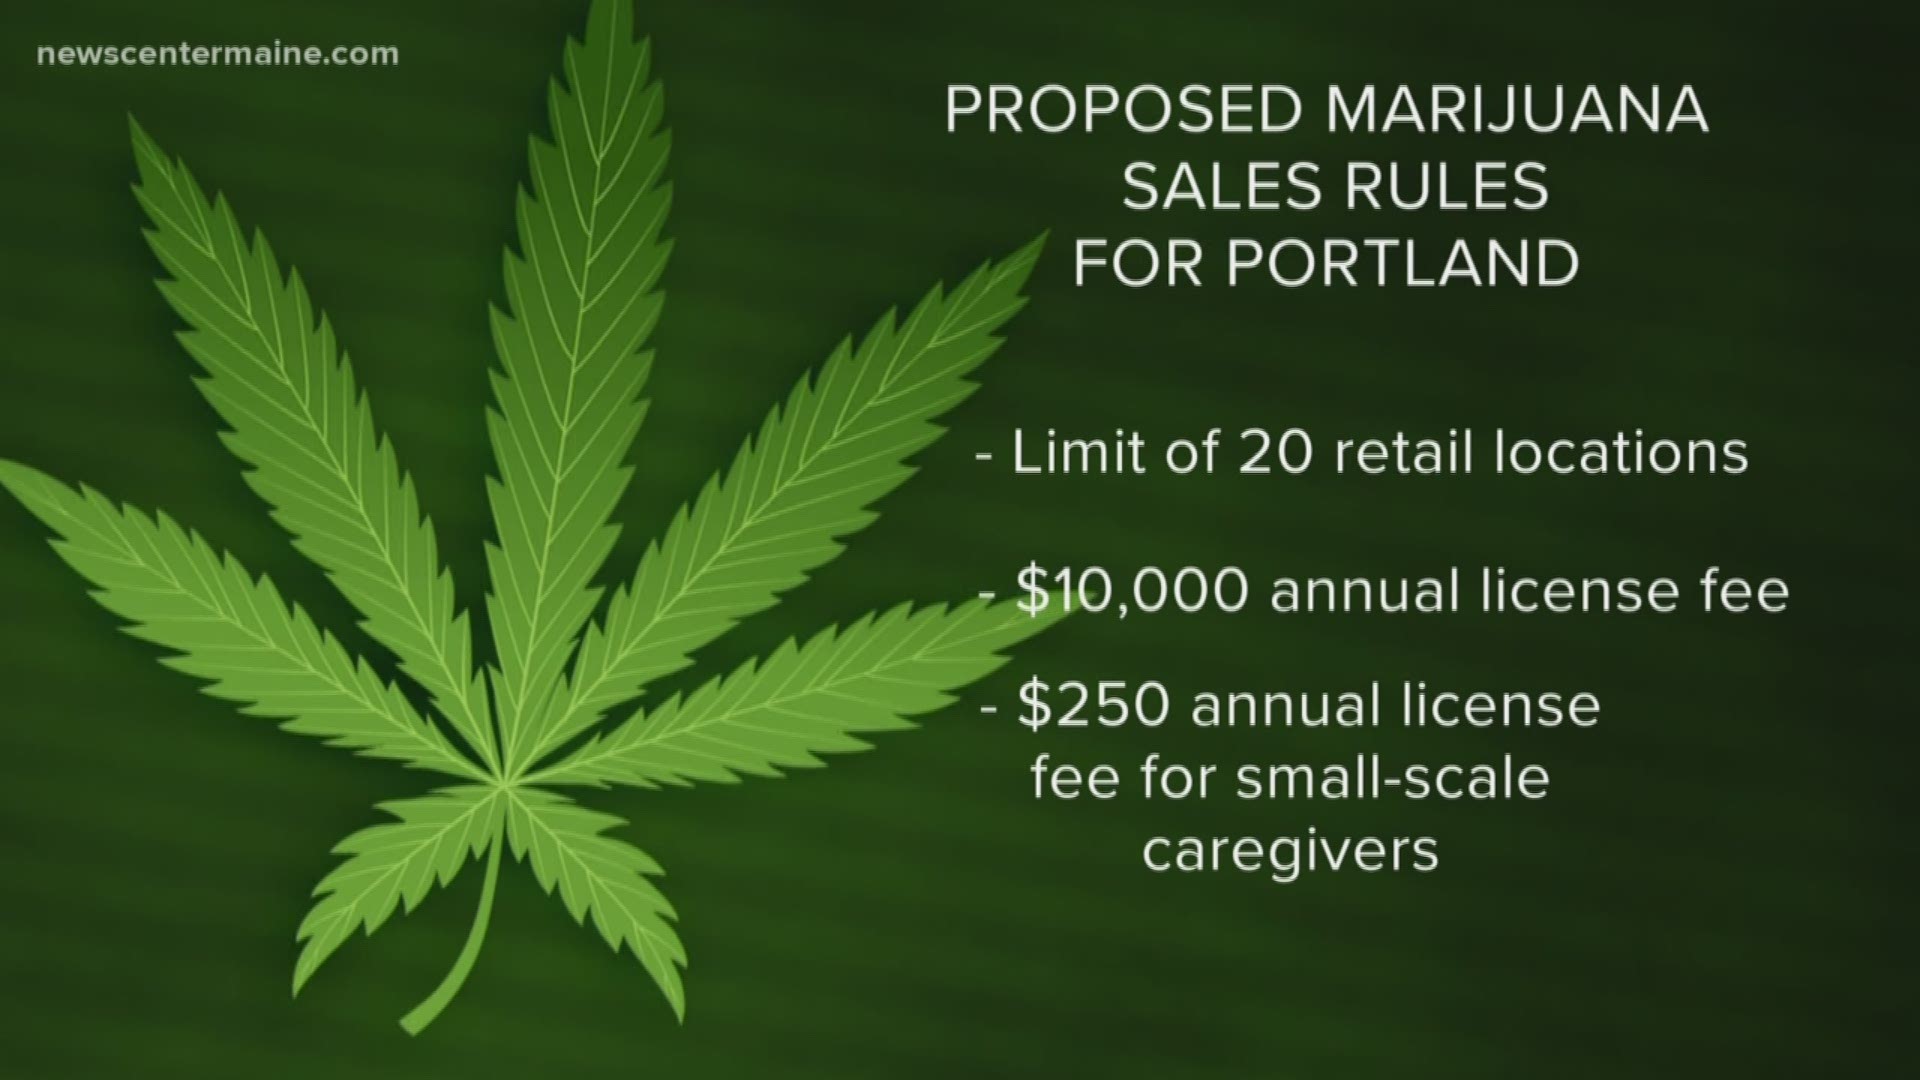 The first set of rules for the sale of marijuana in Portland include a limit of 20 retail locations in the city and a $10,000 annual licensing fee.